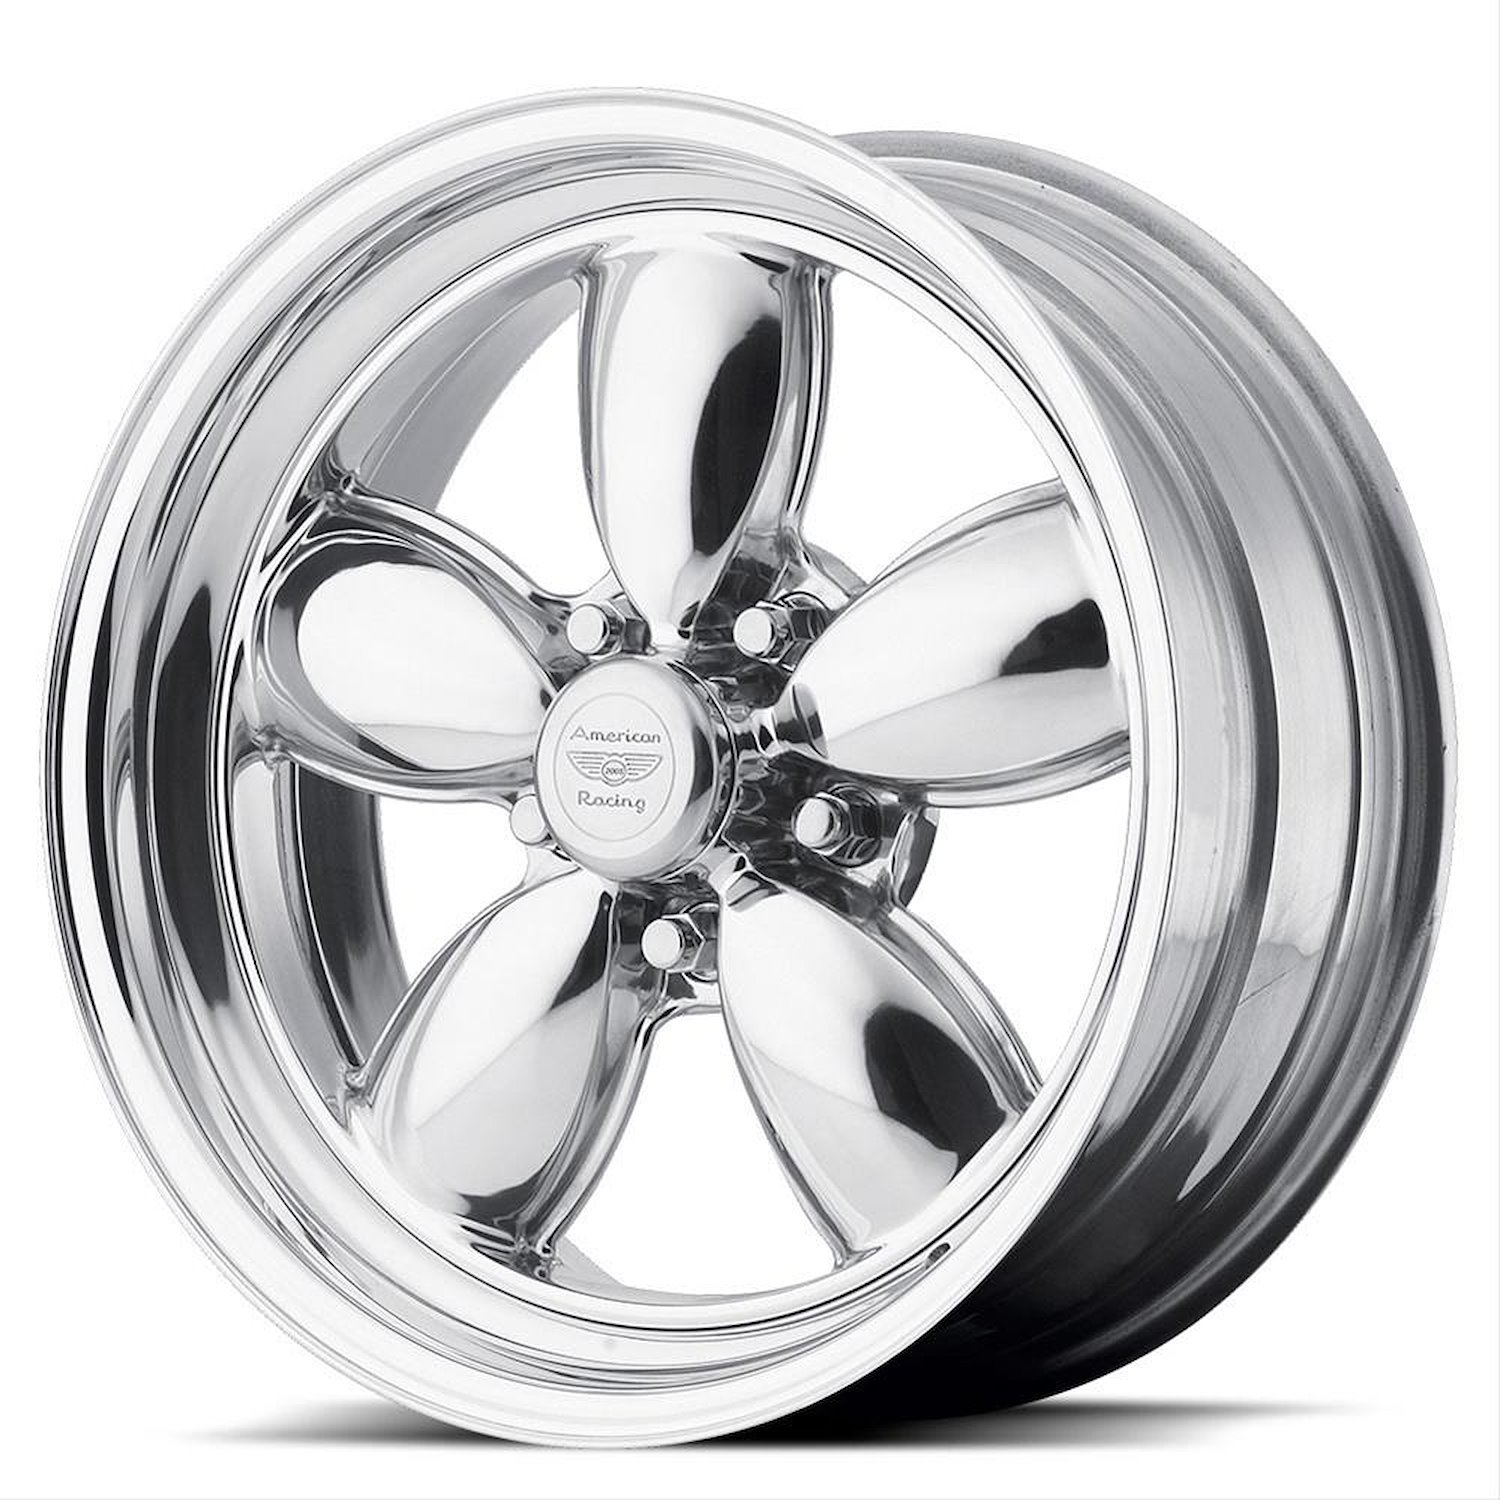 AMERICAN RACING CLASSIC 200S TWO-PIECE POLISHED 15 x 8 5X4.75 -6 4.26